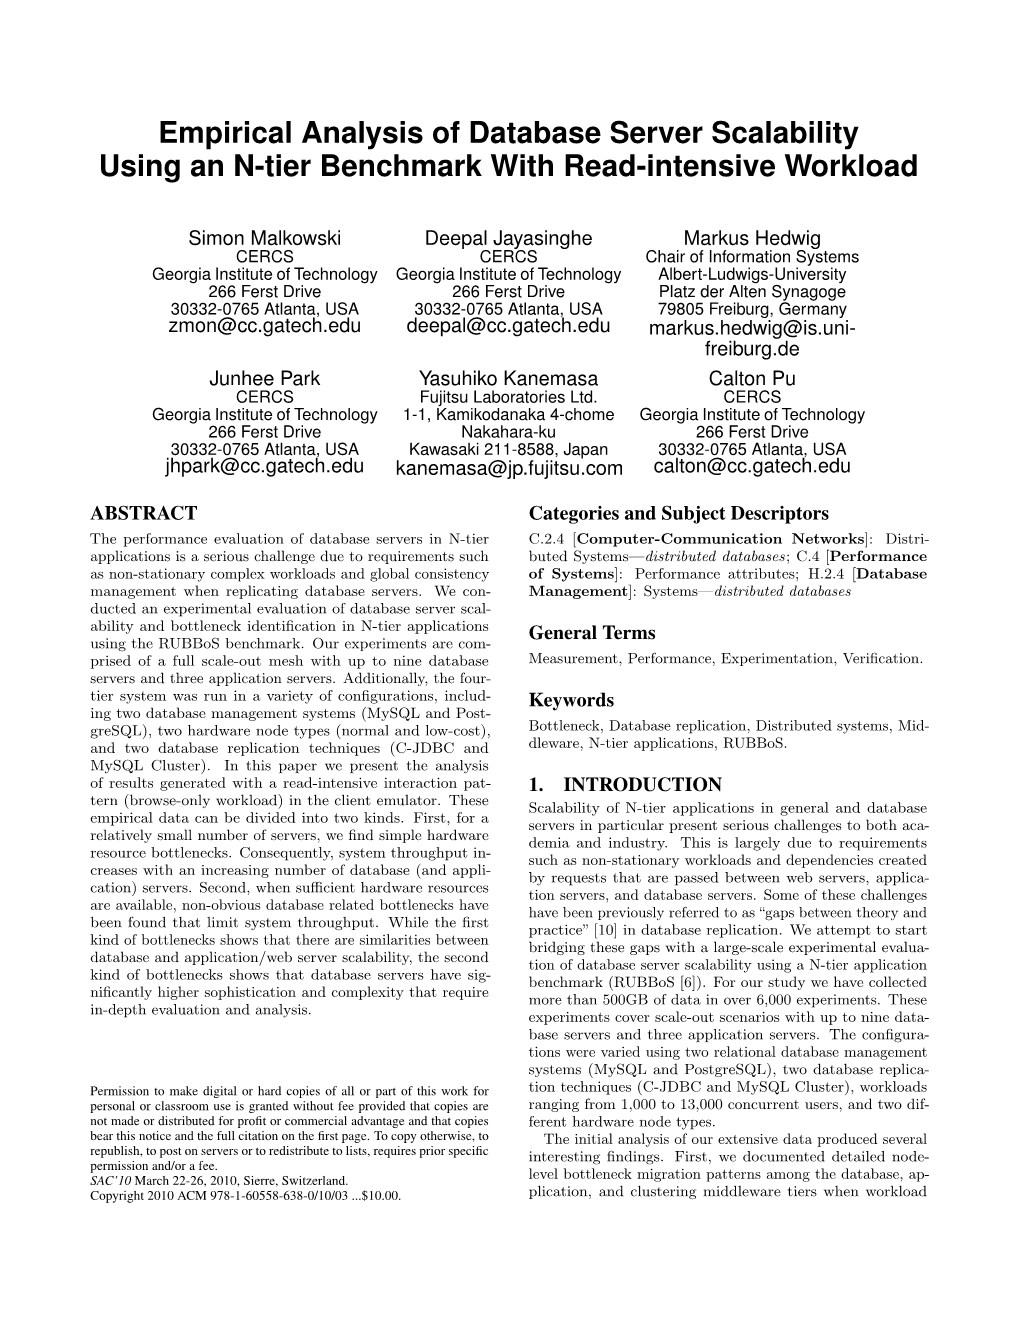 Empirical Analysis of Database Server Scalability Using an N-Tier Benchmark with Read-Intensive Workload